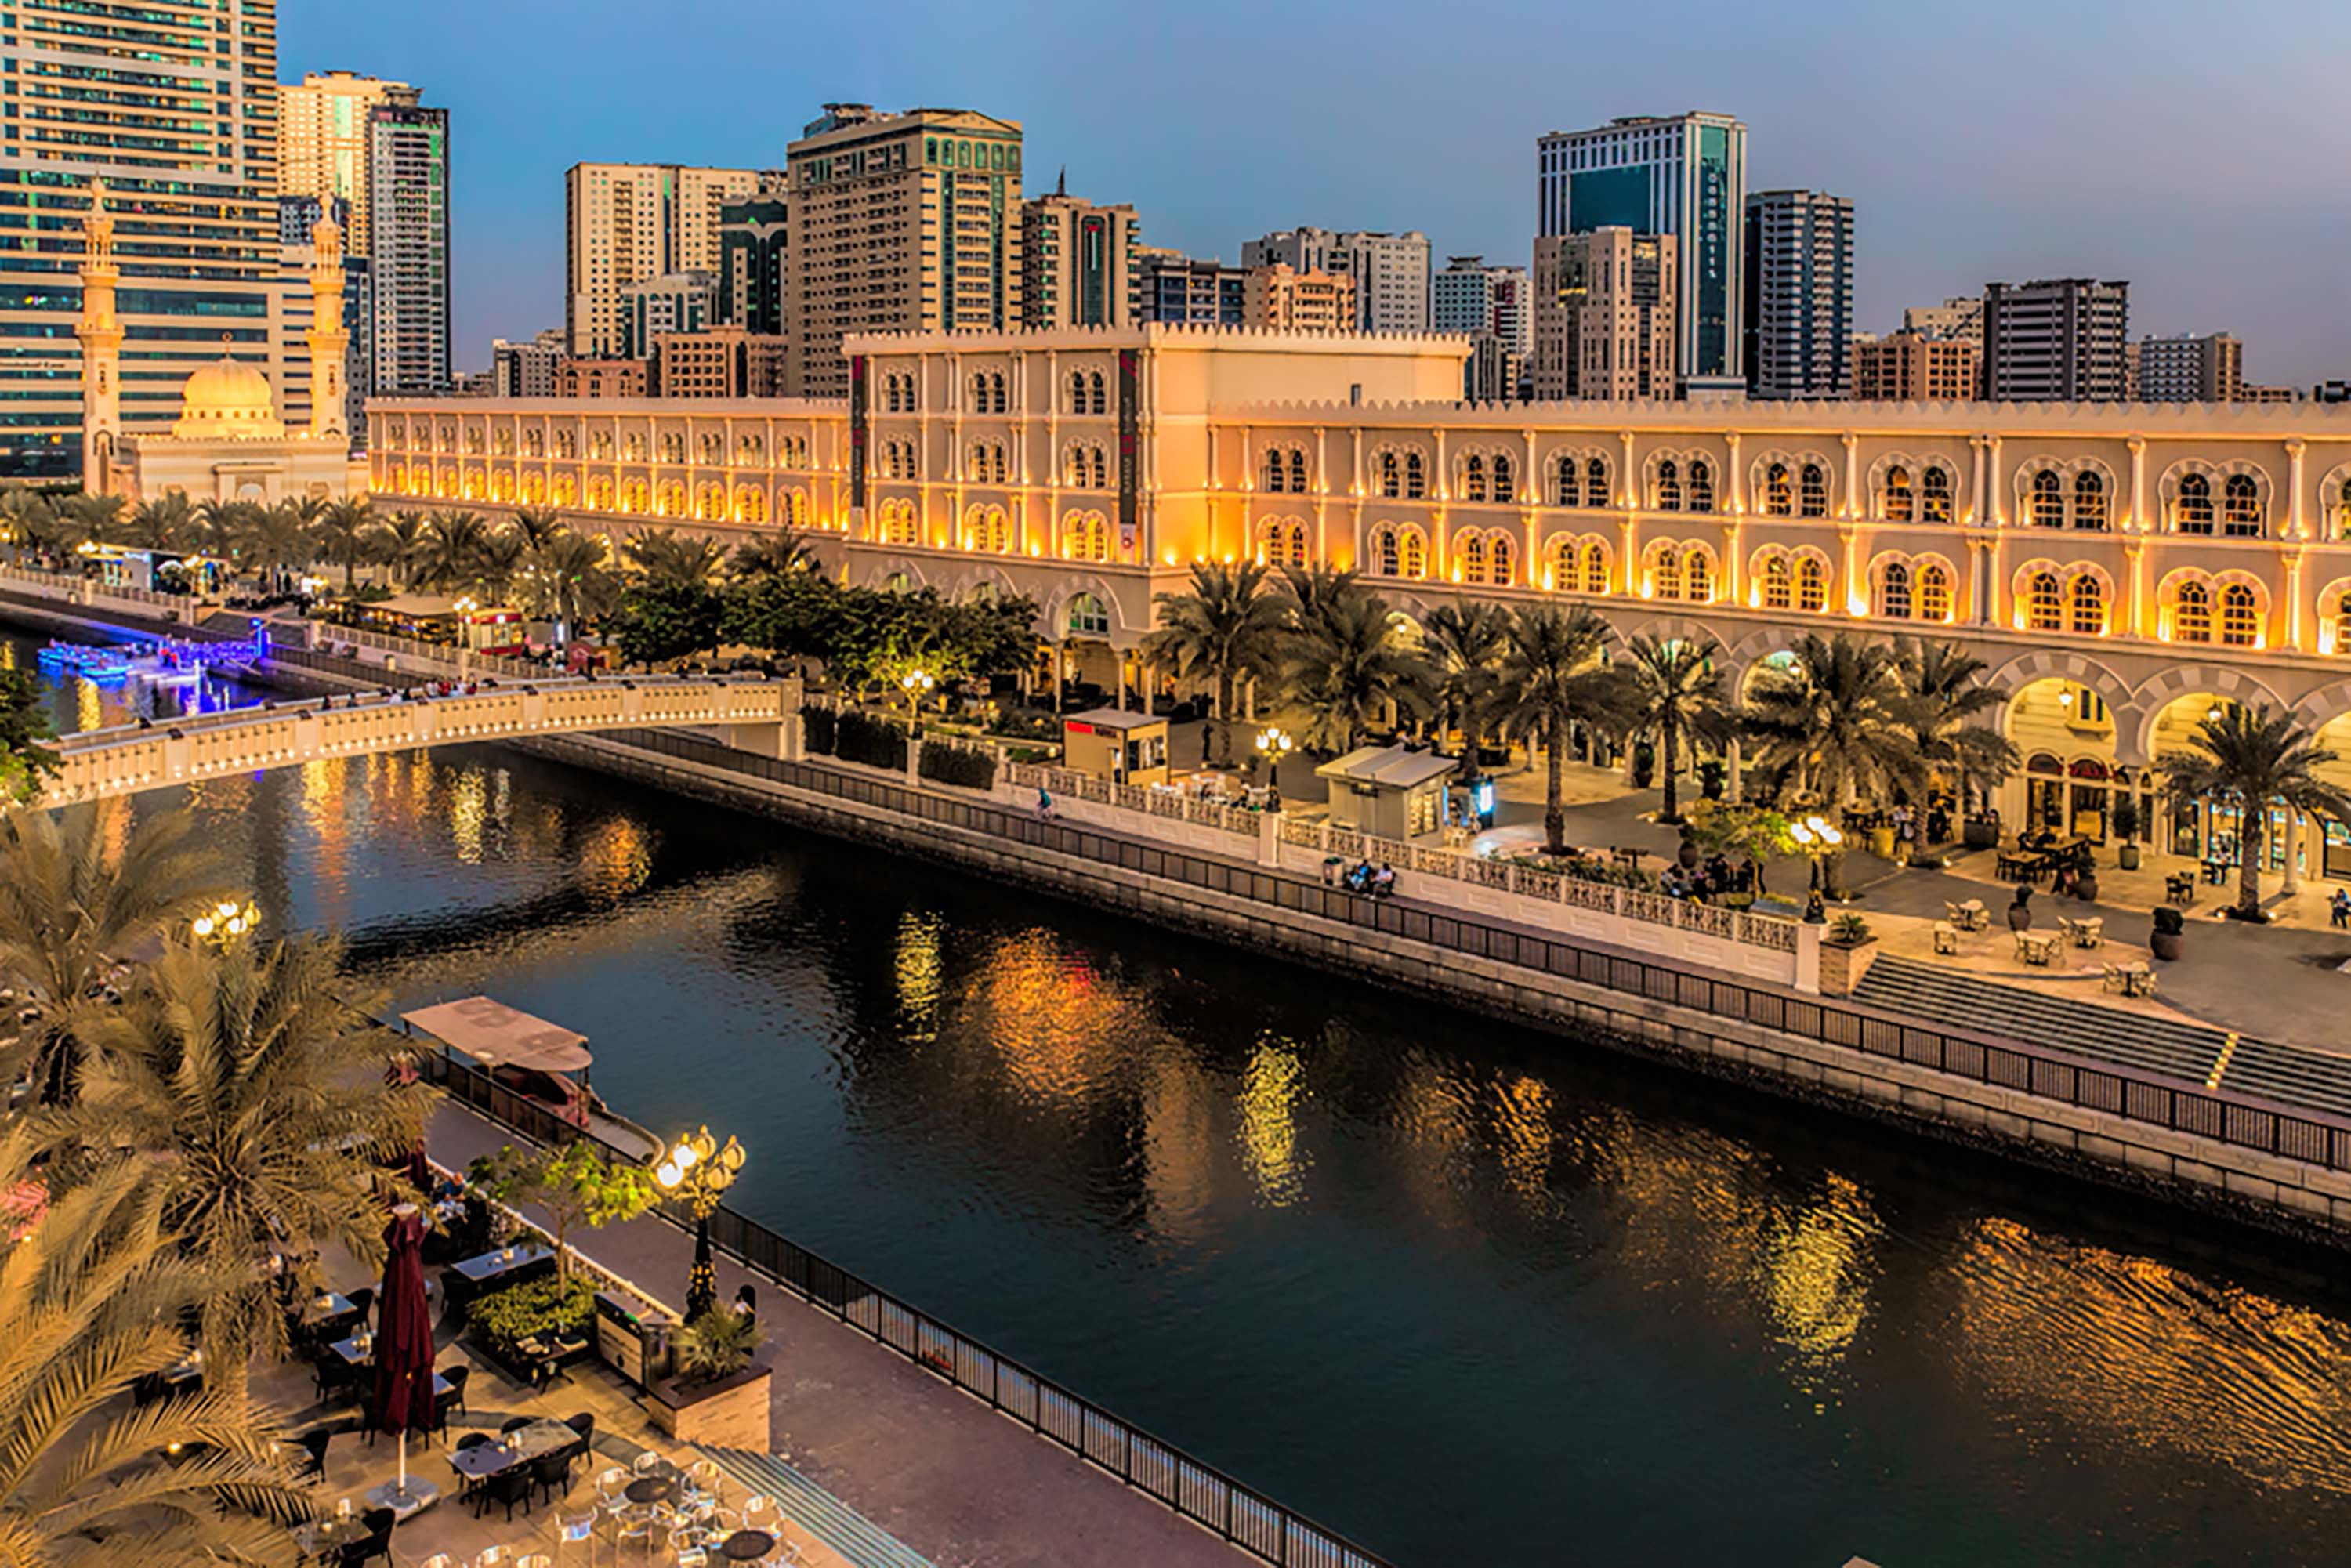 Al Qasba Canal is a beautiful entertainment destination featuring many touristic facilities in Sharjah. It is a water canal that stretches over 1,000 metres and connects Khalid Lagoon with Al Khan Lagoon